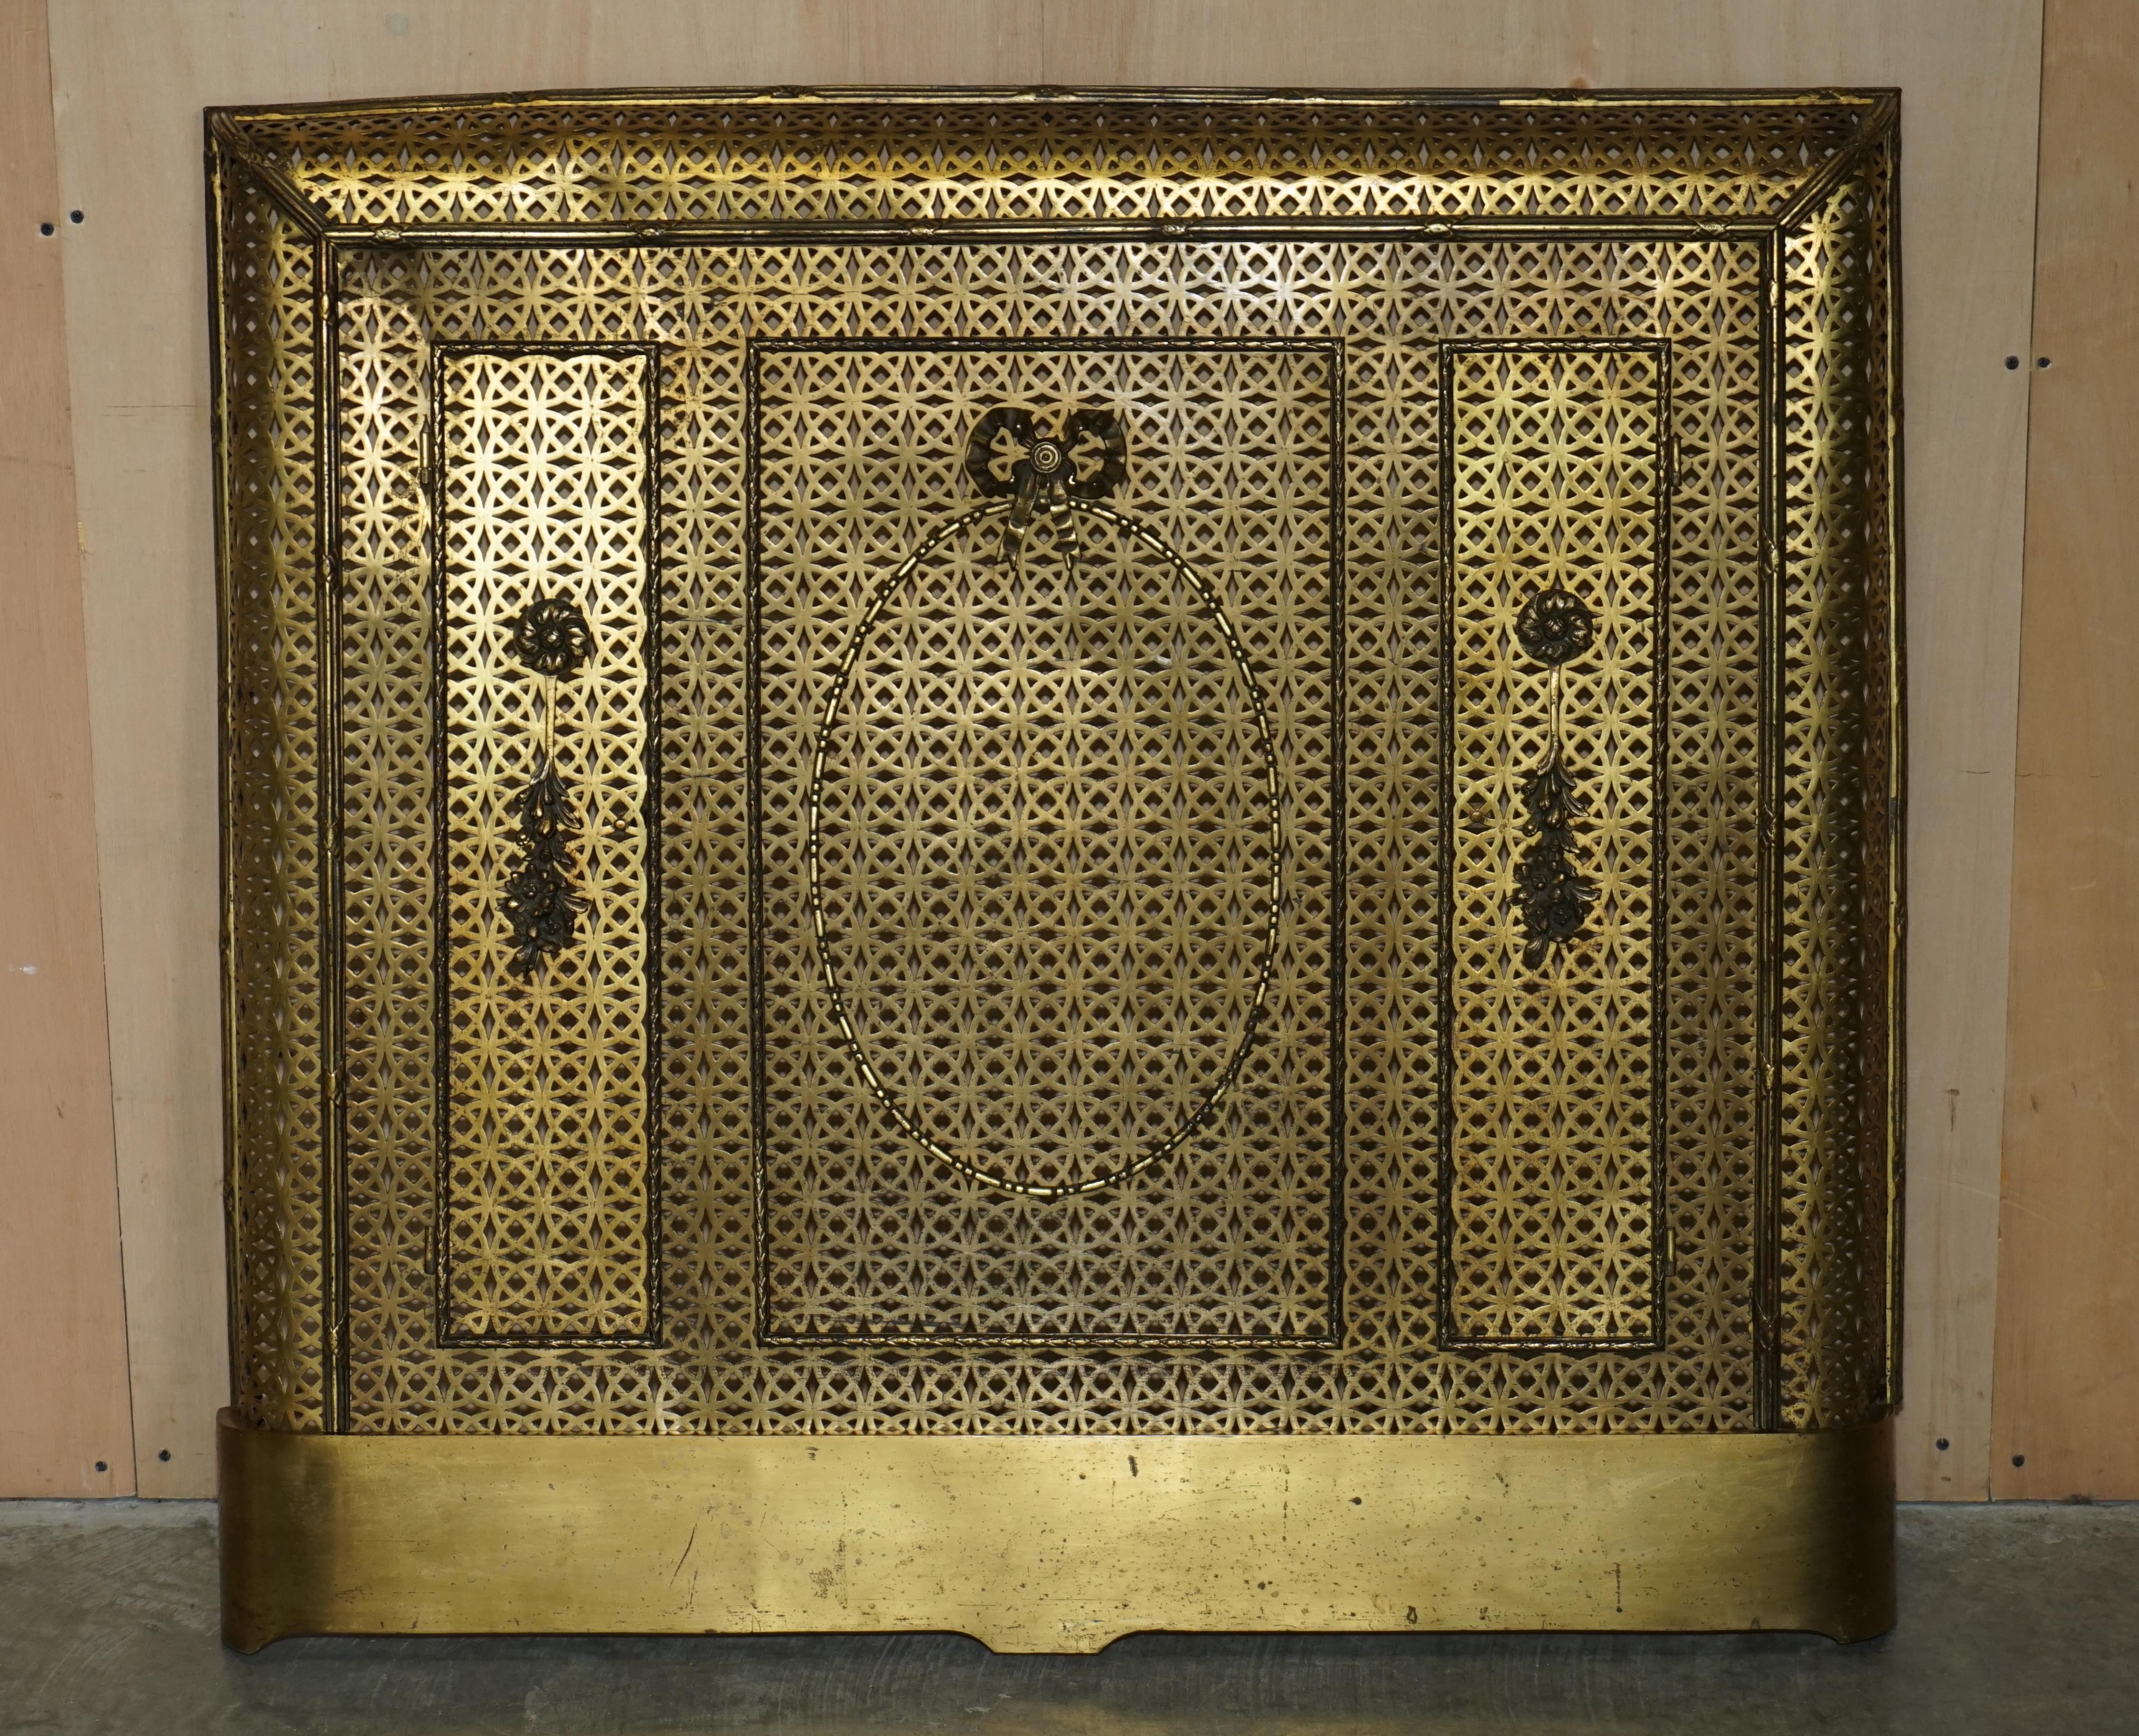 We are is delighted to offer for sale this very rare and desirable, circa 1920 French Art Deco Pierced sheet radiator cover with ornate detailing and twin doors 

I have never seen another of this quality before, it could be used for pure